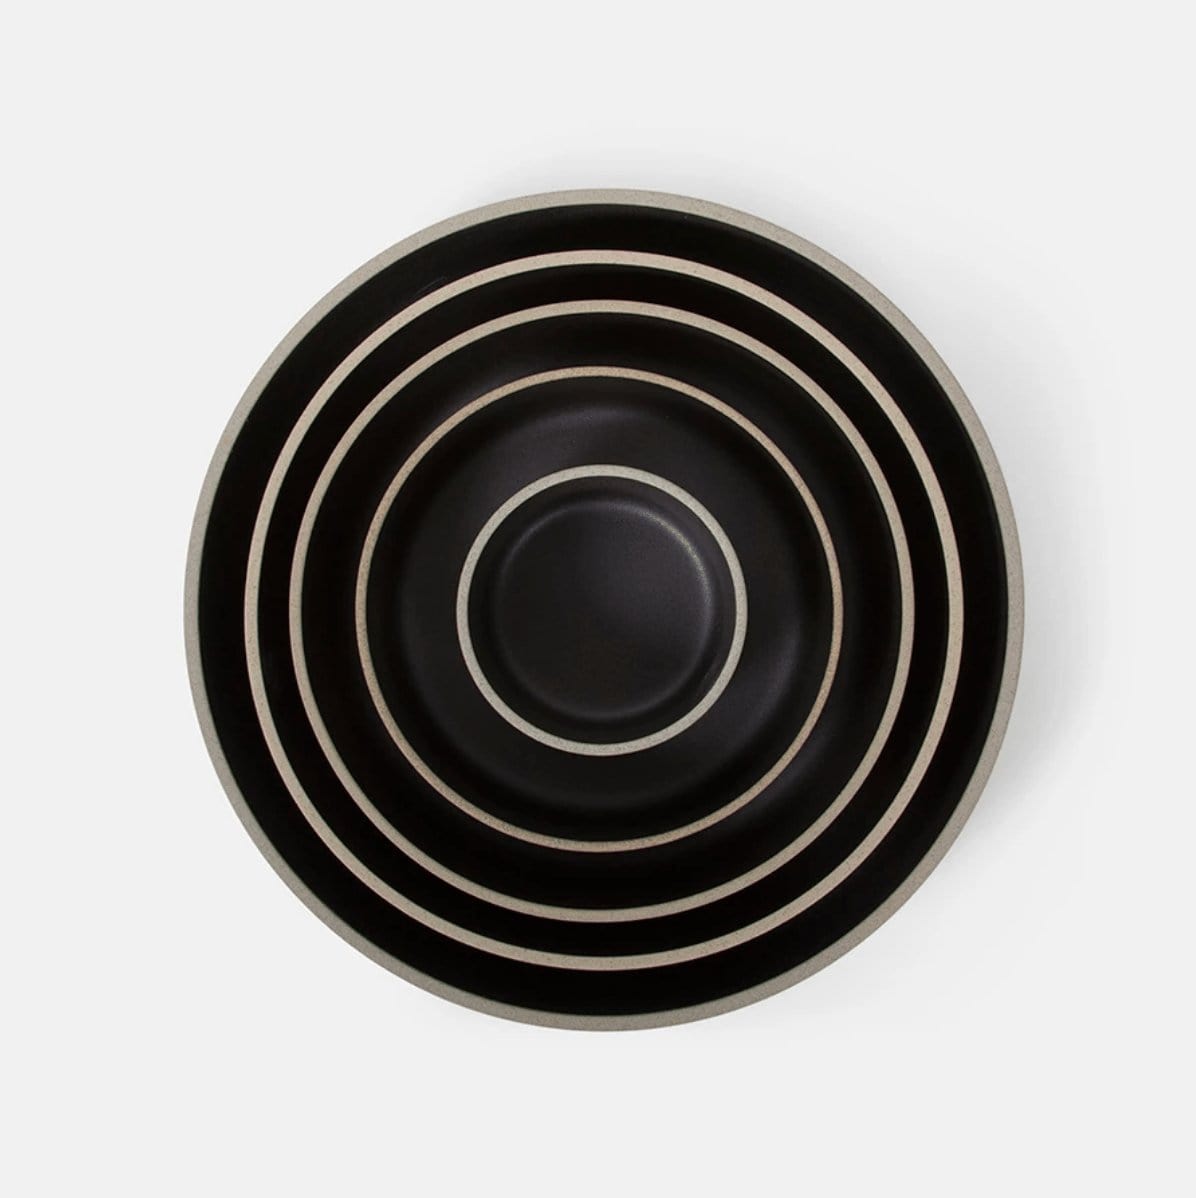 Hasami - Low Bowl // All Colours - Kitchenware - DANSKmadeforrooms